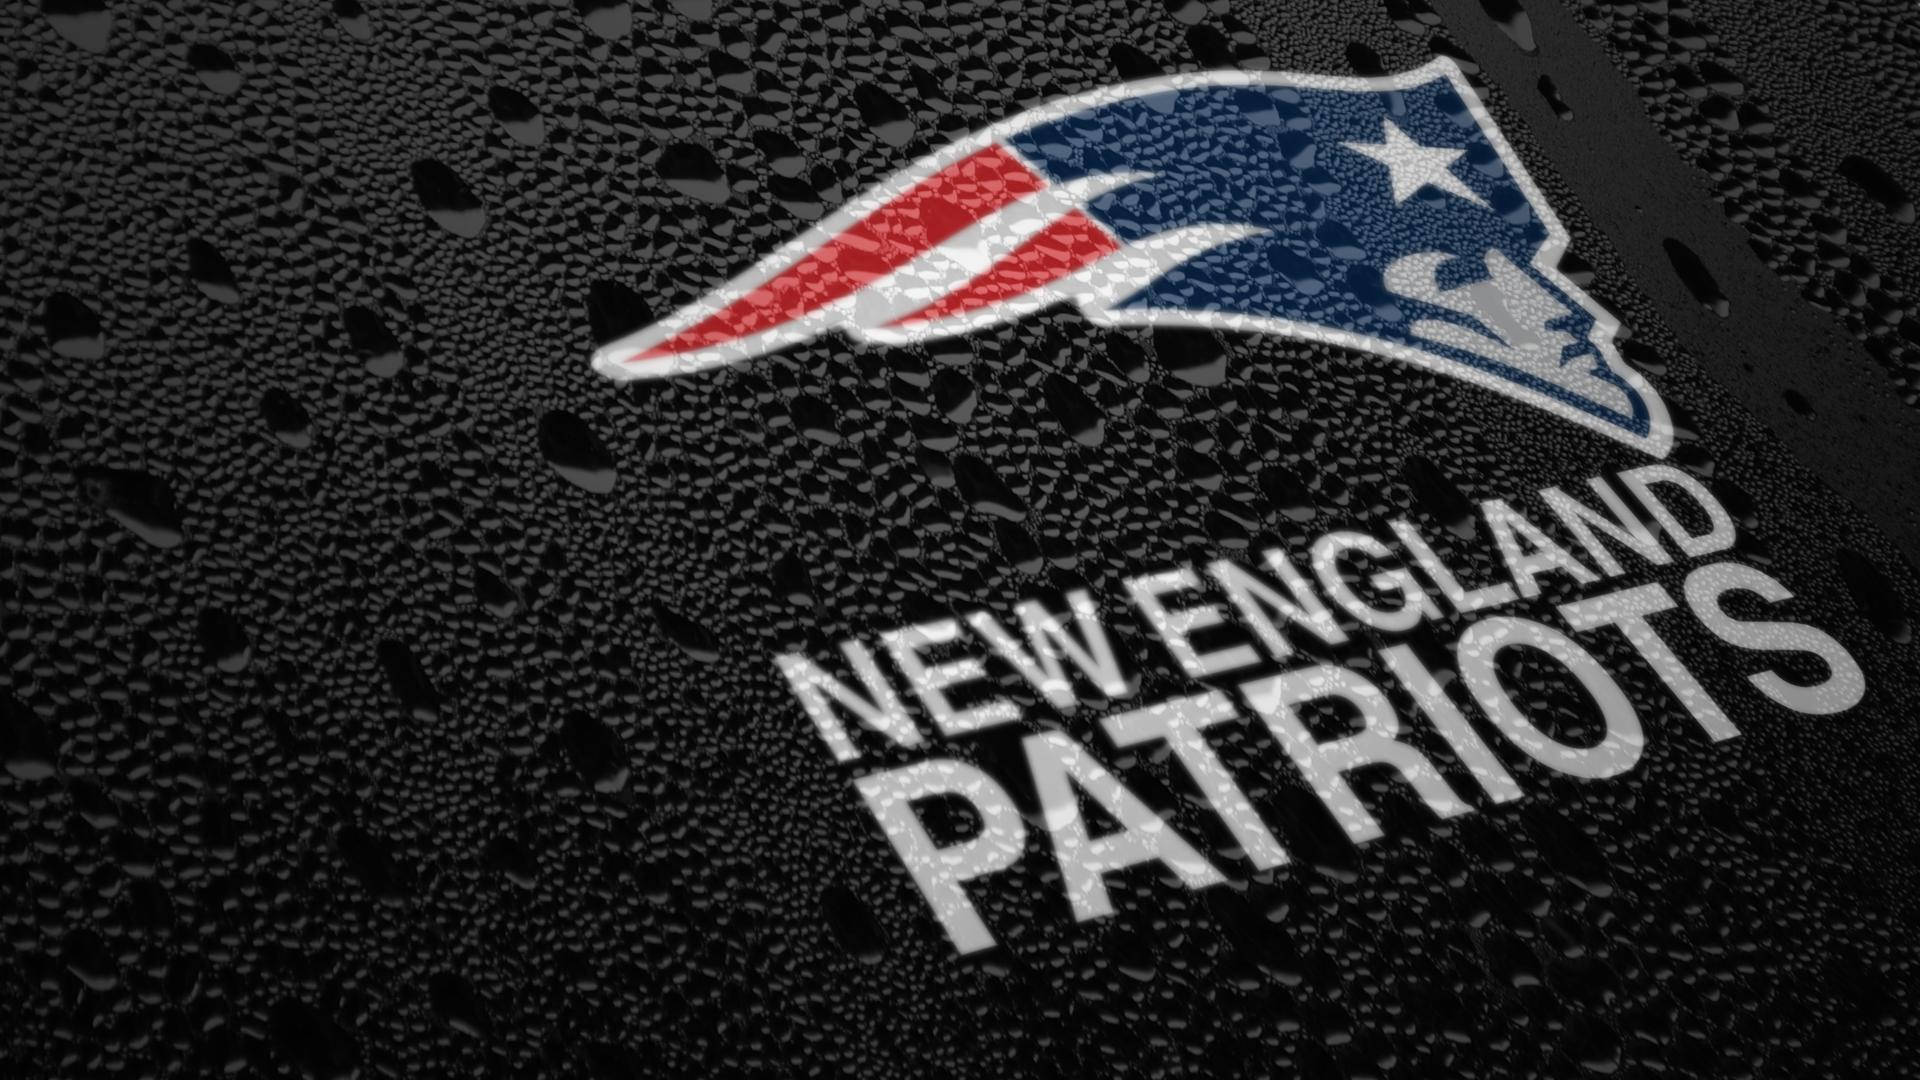 100+] Patriots Wallpapers for FREE 